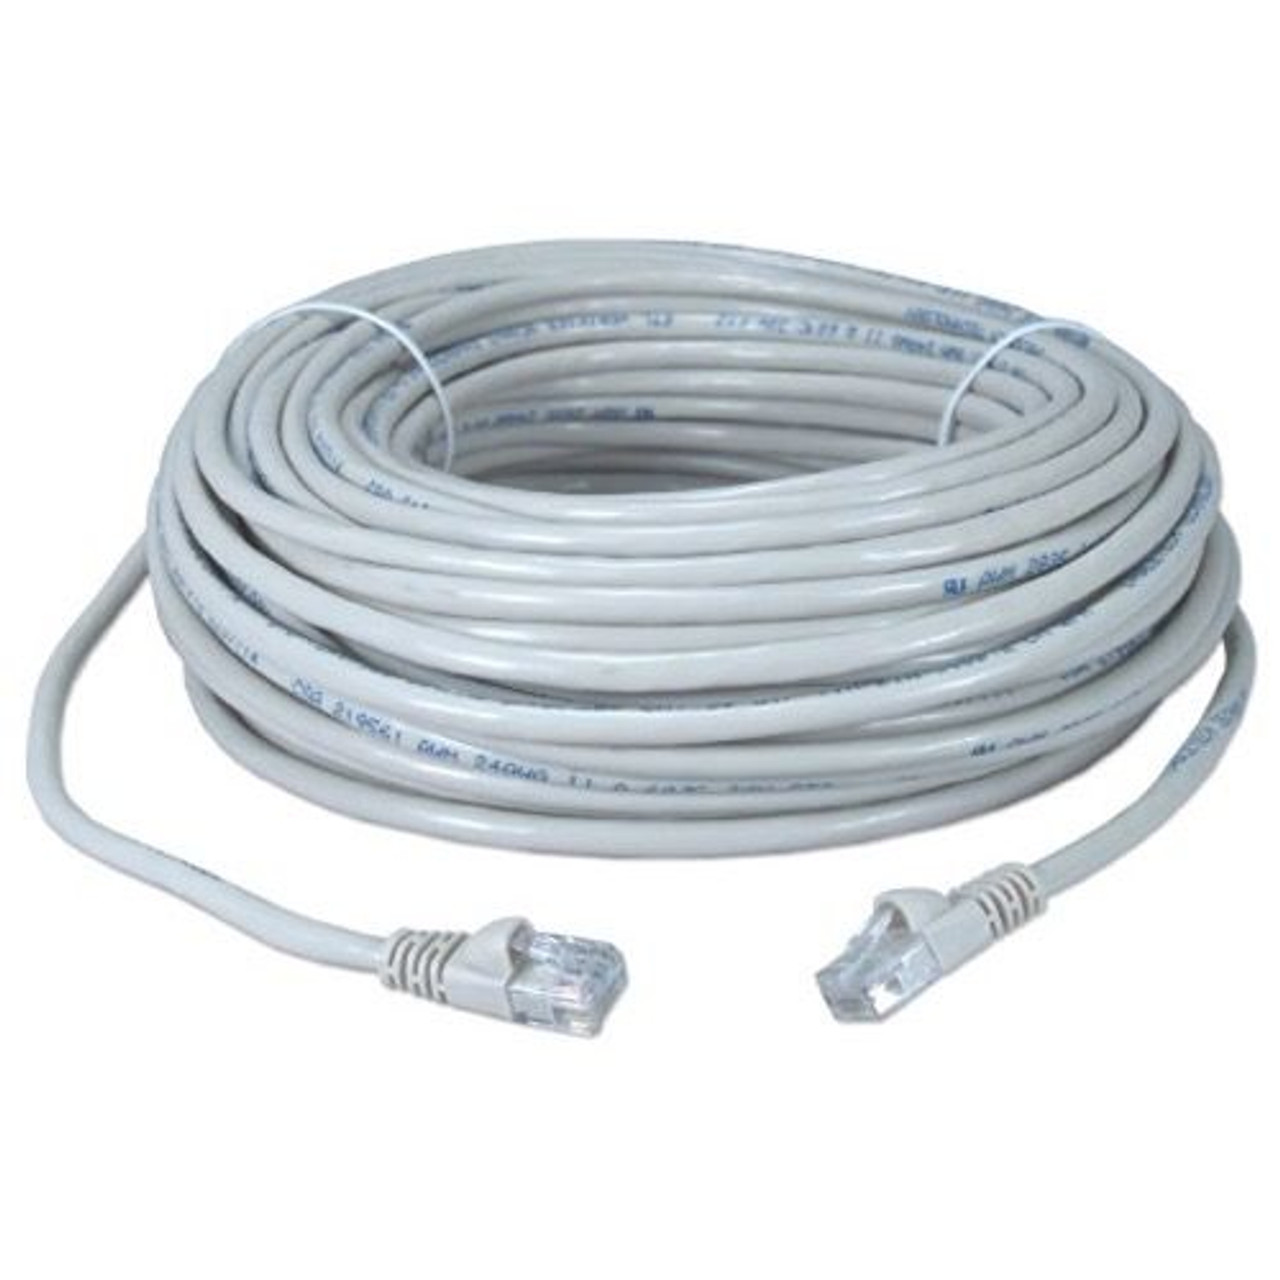 Eagle 25' FT CAT5E Patch Cord Cable White Snagless UTP RJ45 Connector Each End Lan Network Gold Plated 100% Tested 24 AWG Copper Stranded Male to Male Enhanced Category 5e High Speed Ethernet Data Computer Gaming Jumper